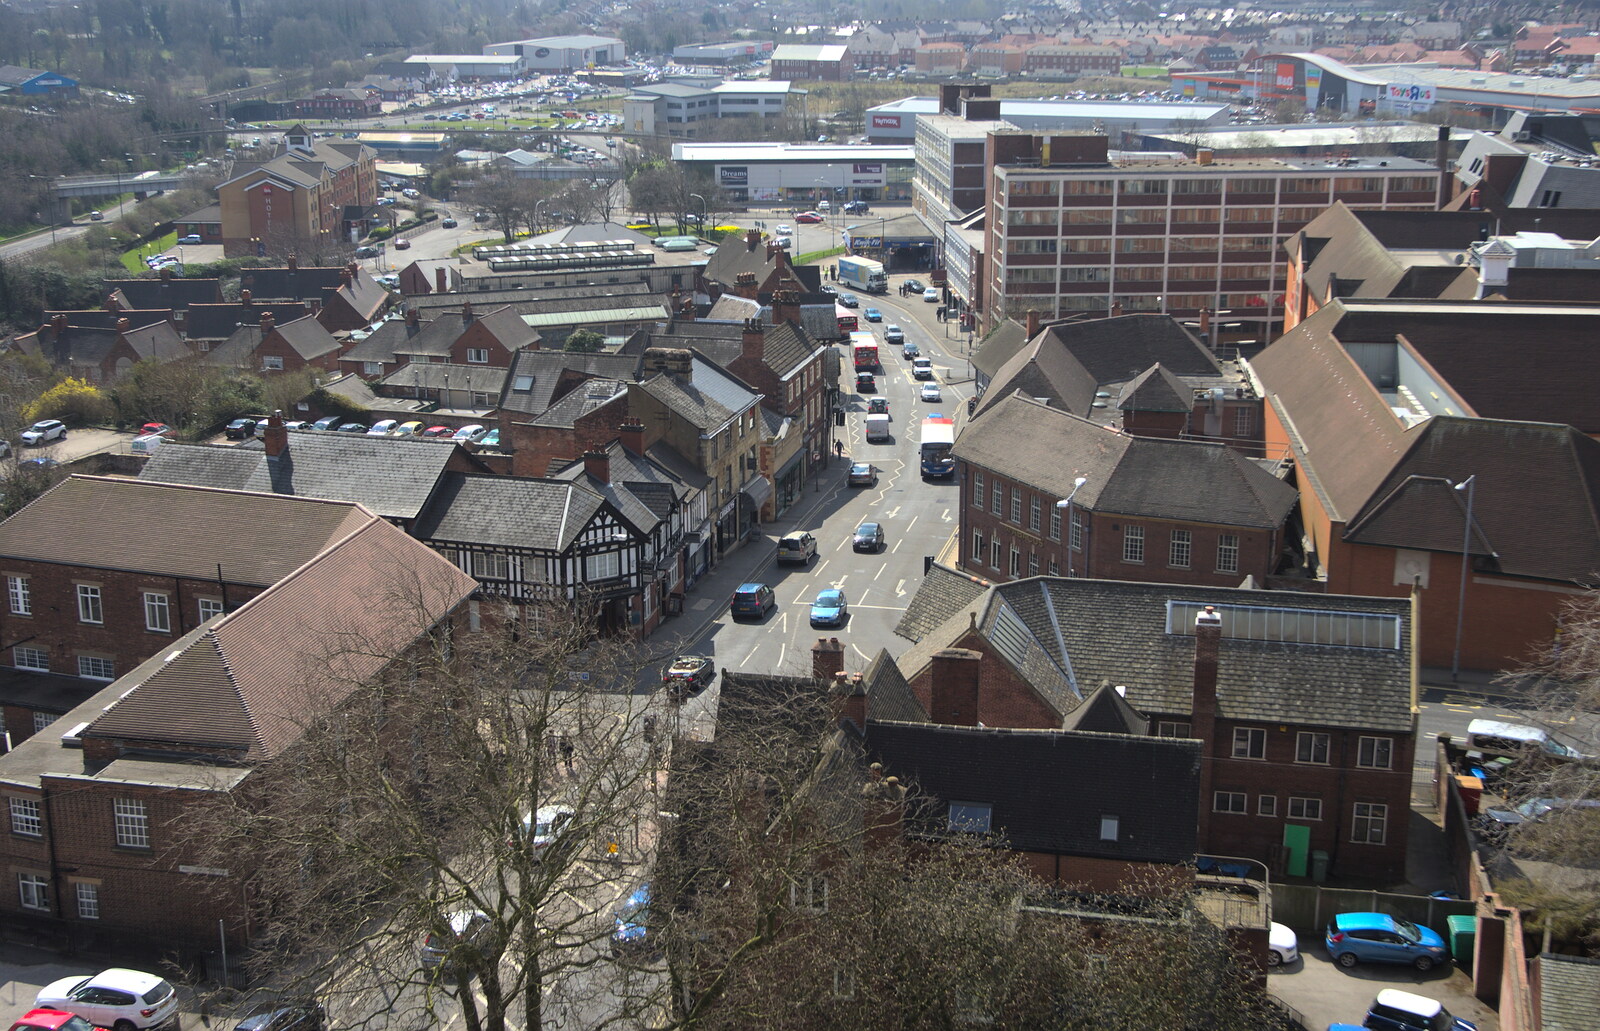 A view of Chesterfield from Chesterfield and the Twisty Spire, Derbyshire - 19th April 2013